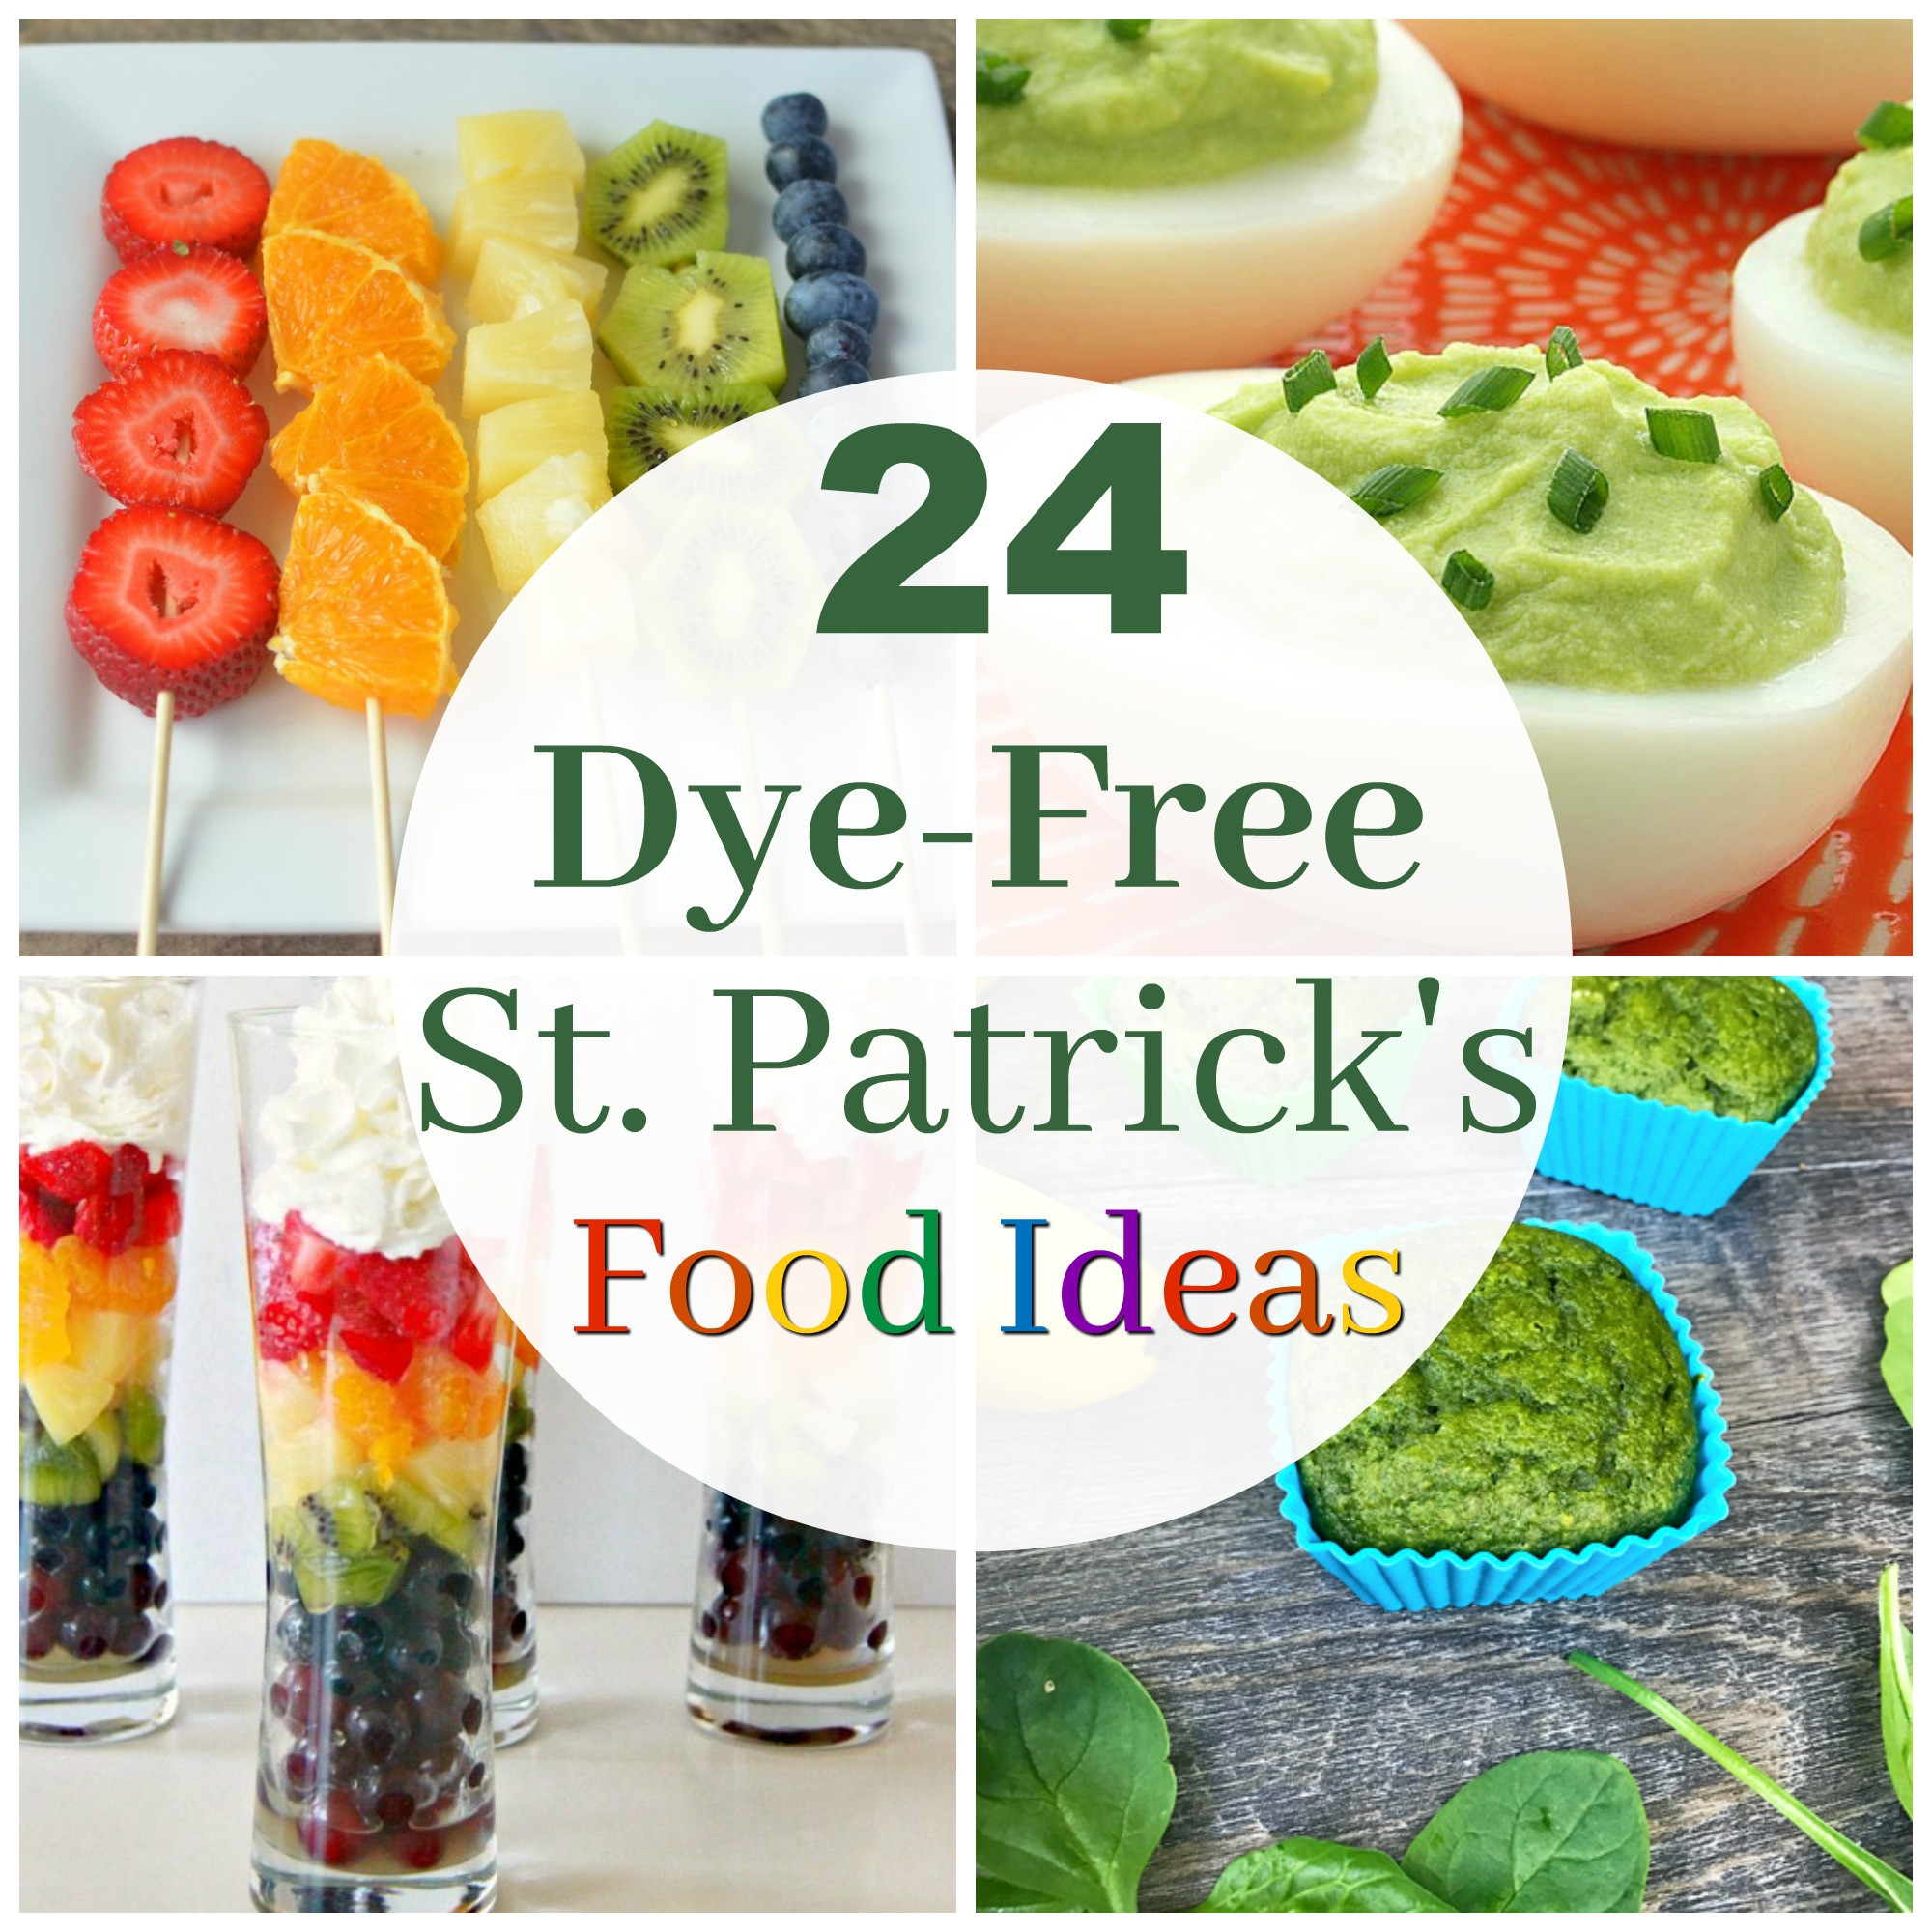 St Patrick's Day Snack Ideas
 24 Dye Free Ideas for Fun St Patrick s Day Food